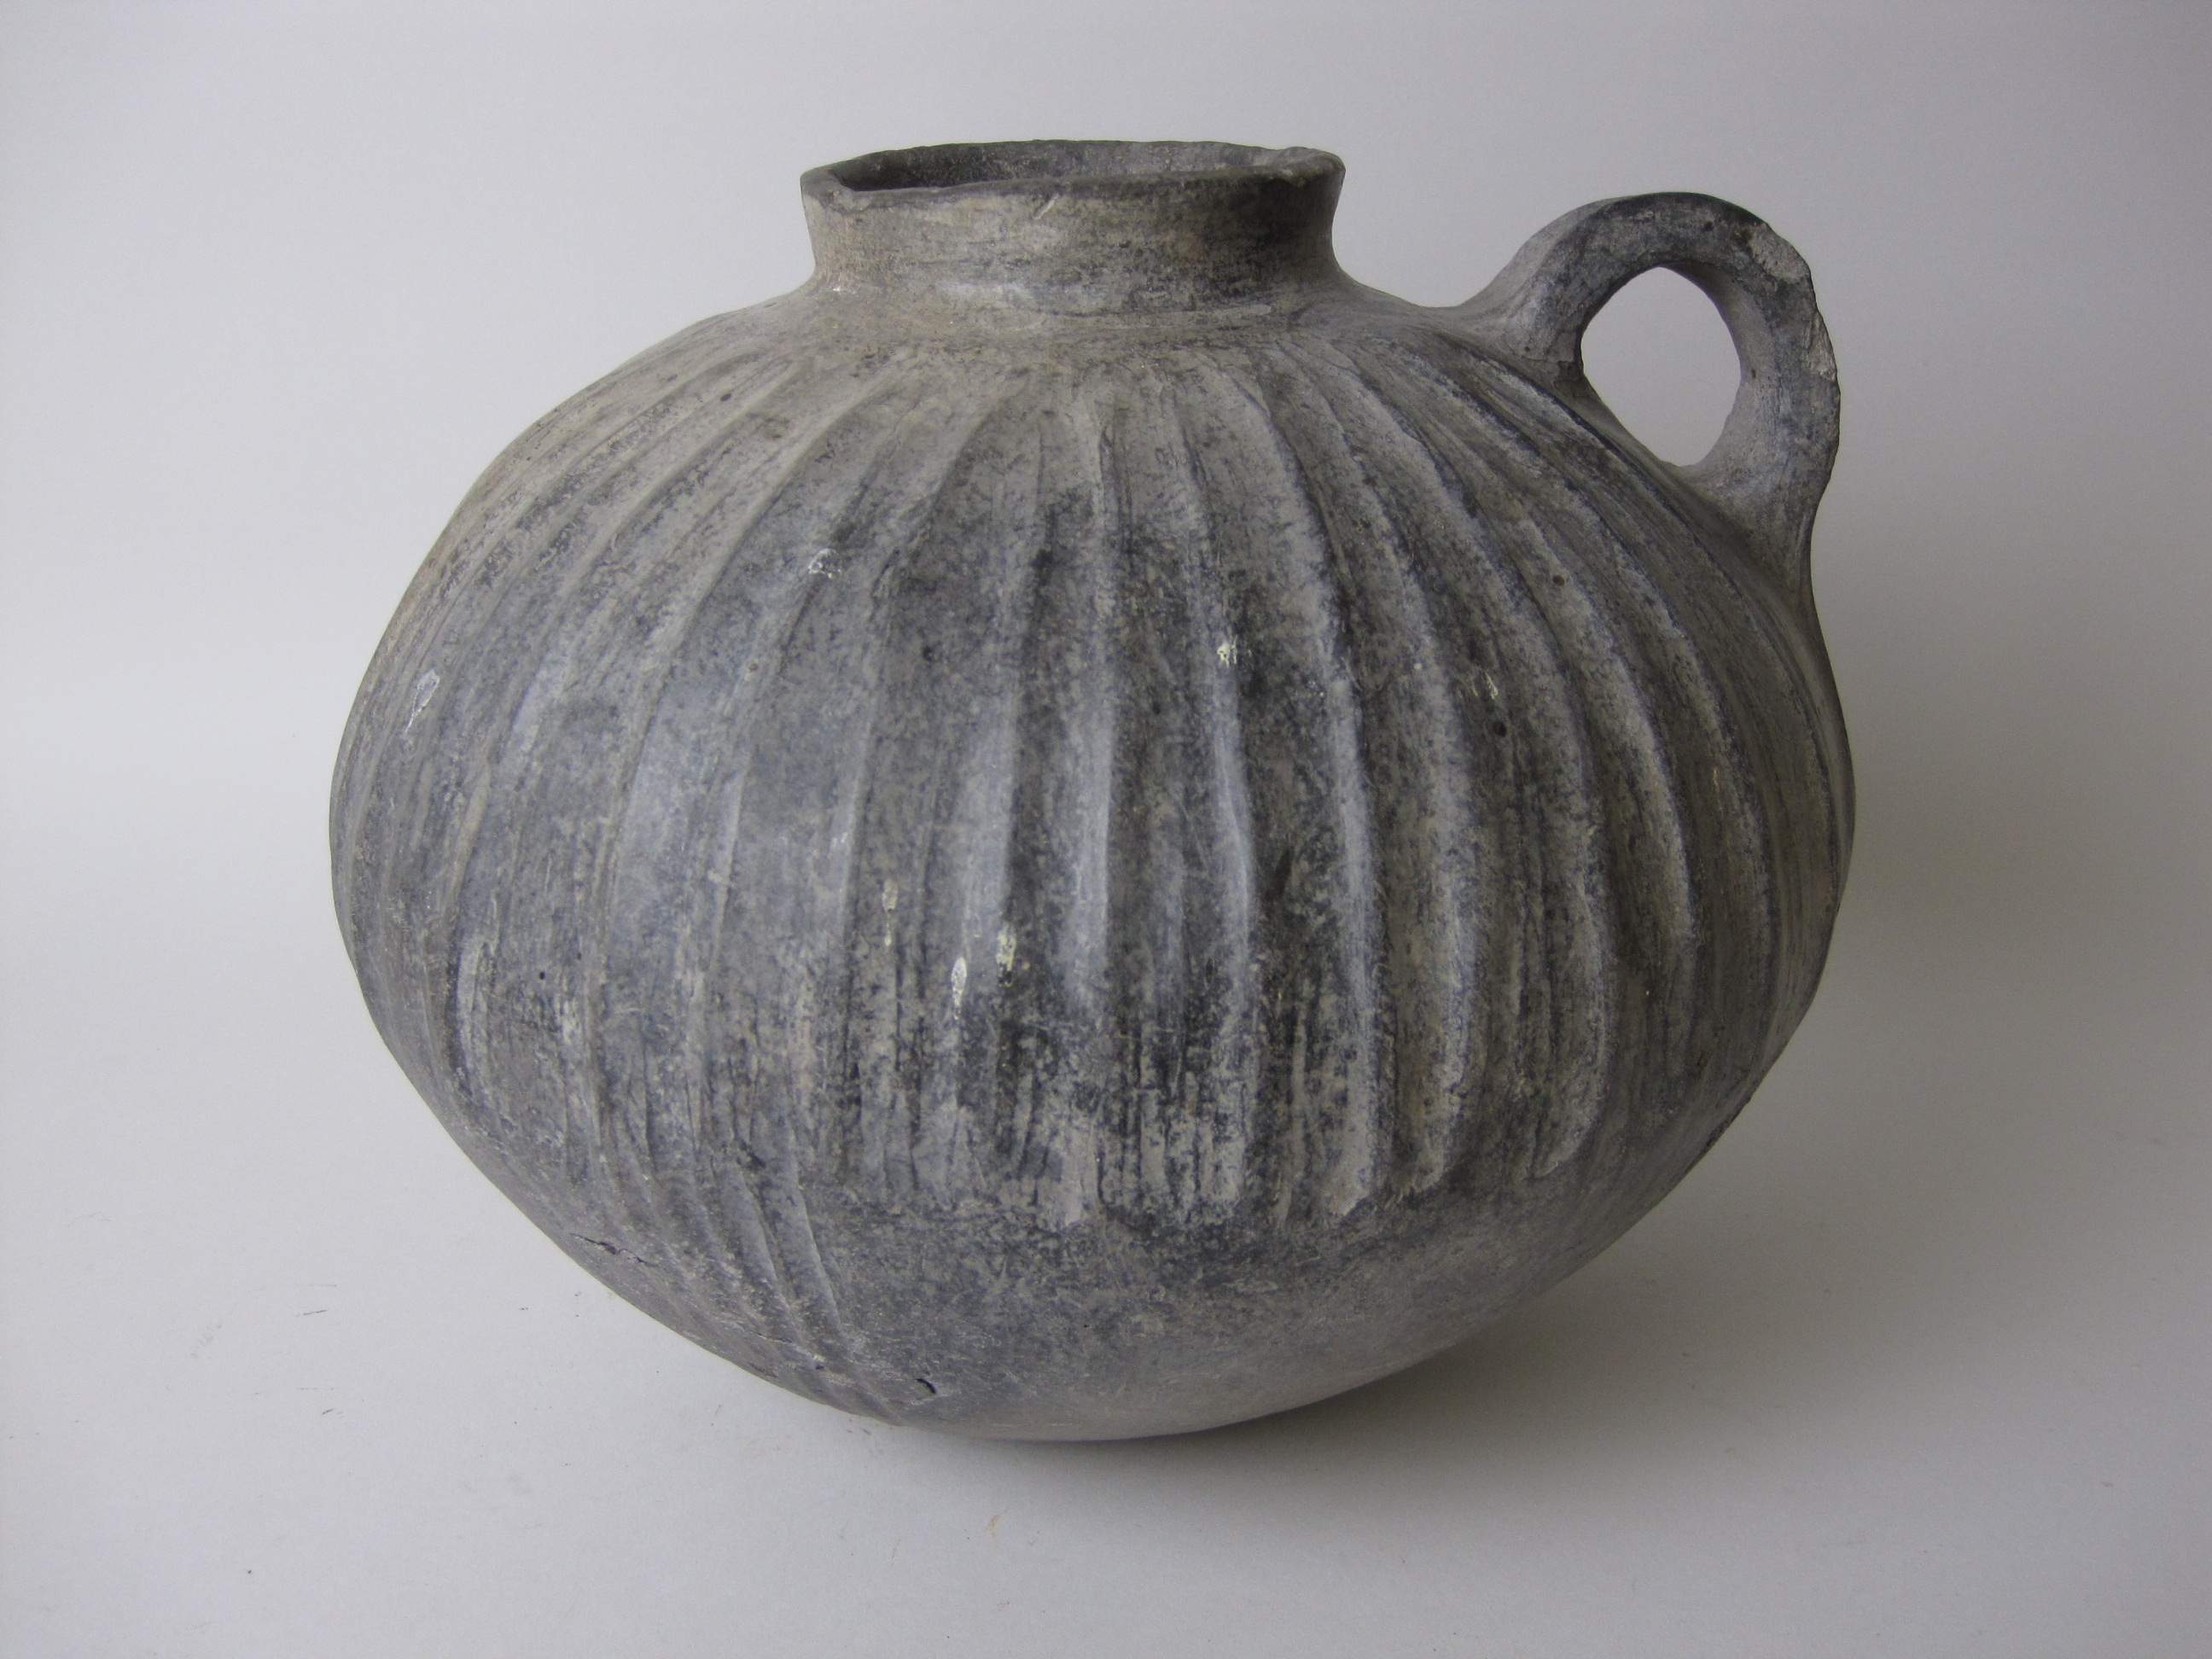 An ancient near Eastern black burnished ware Vessel, spherical body with vertical ribbing, raised